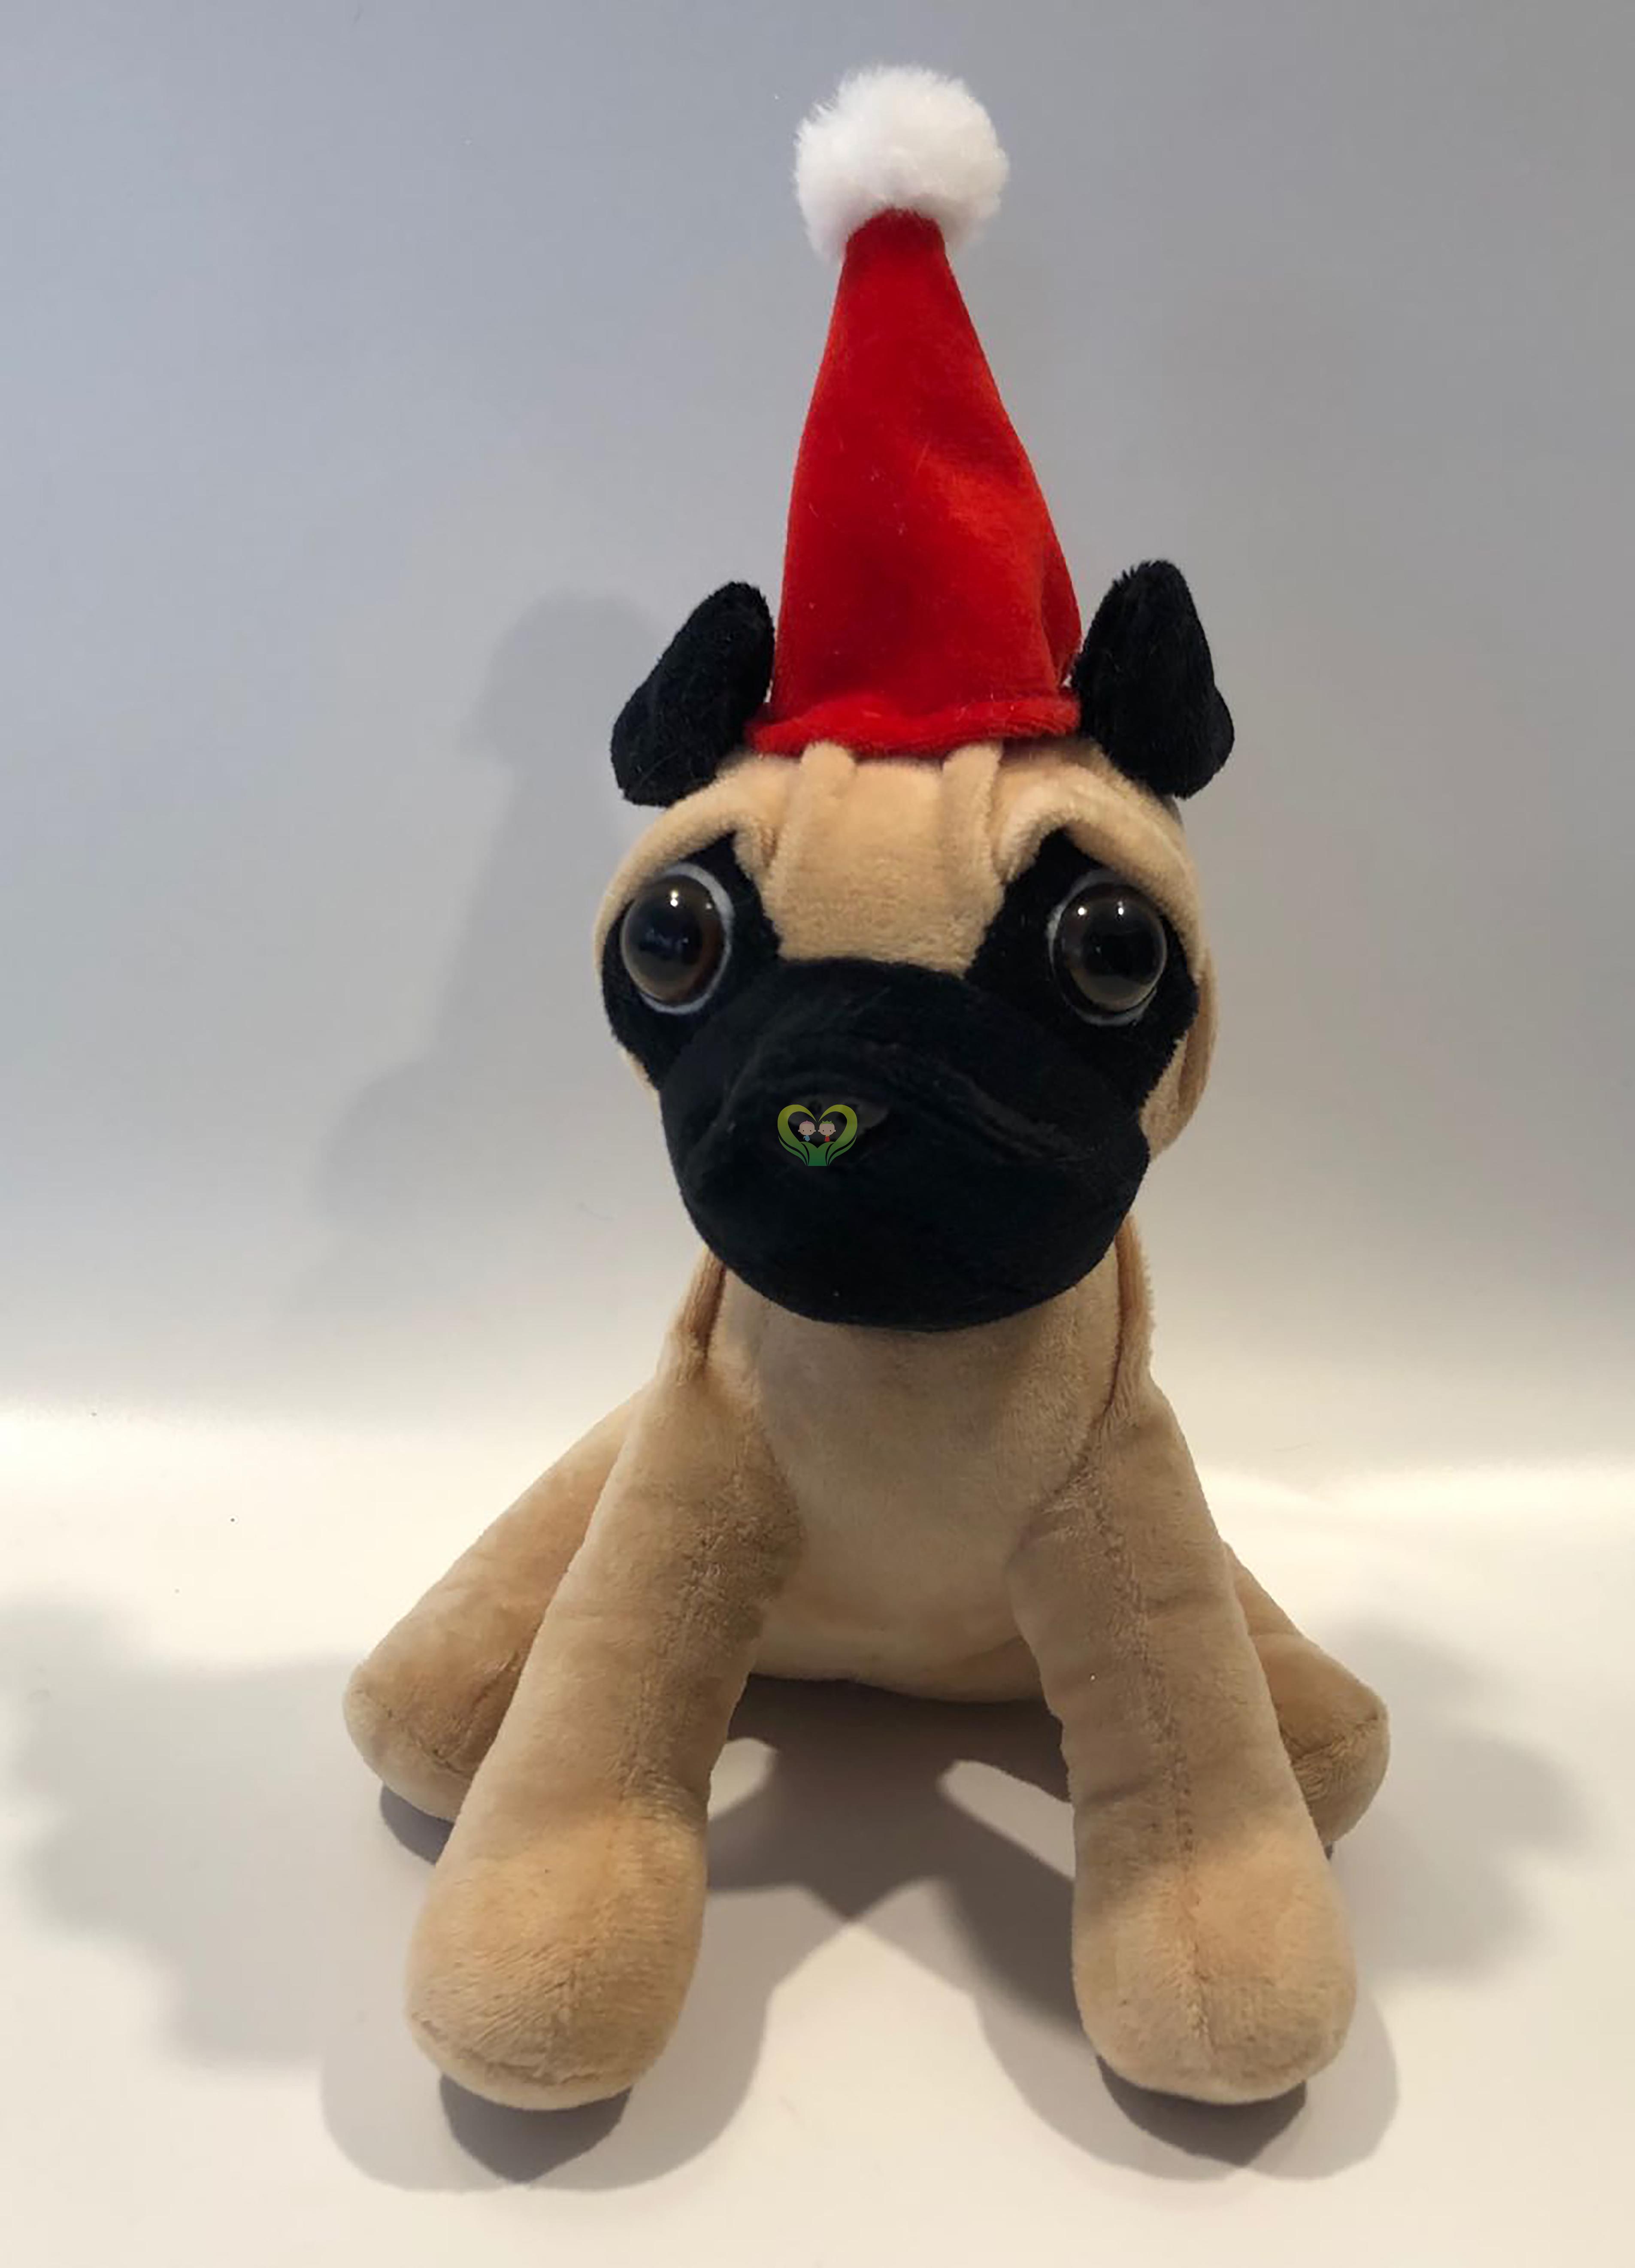 2018 Christmas plush toy: Gift item: Wrinkle Dog with red hat